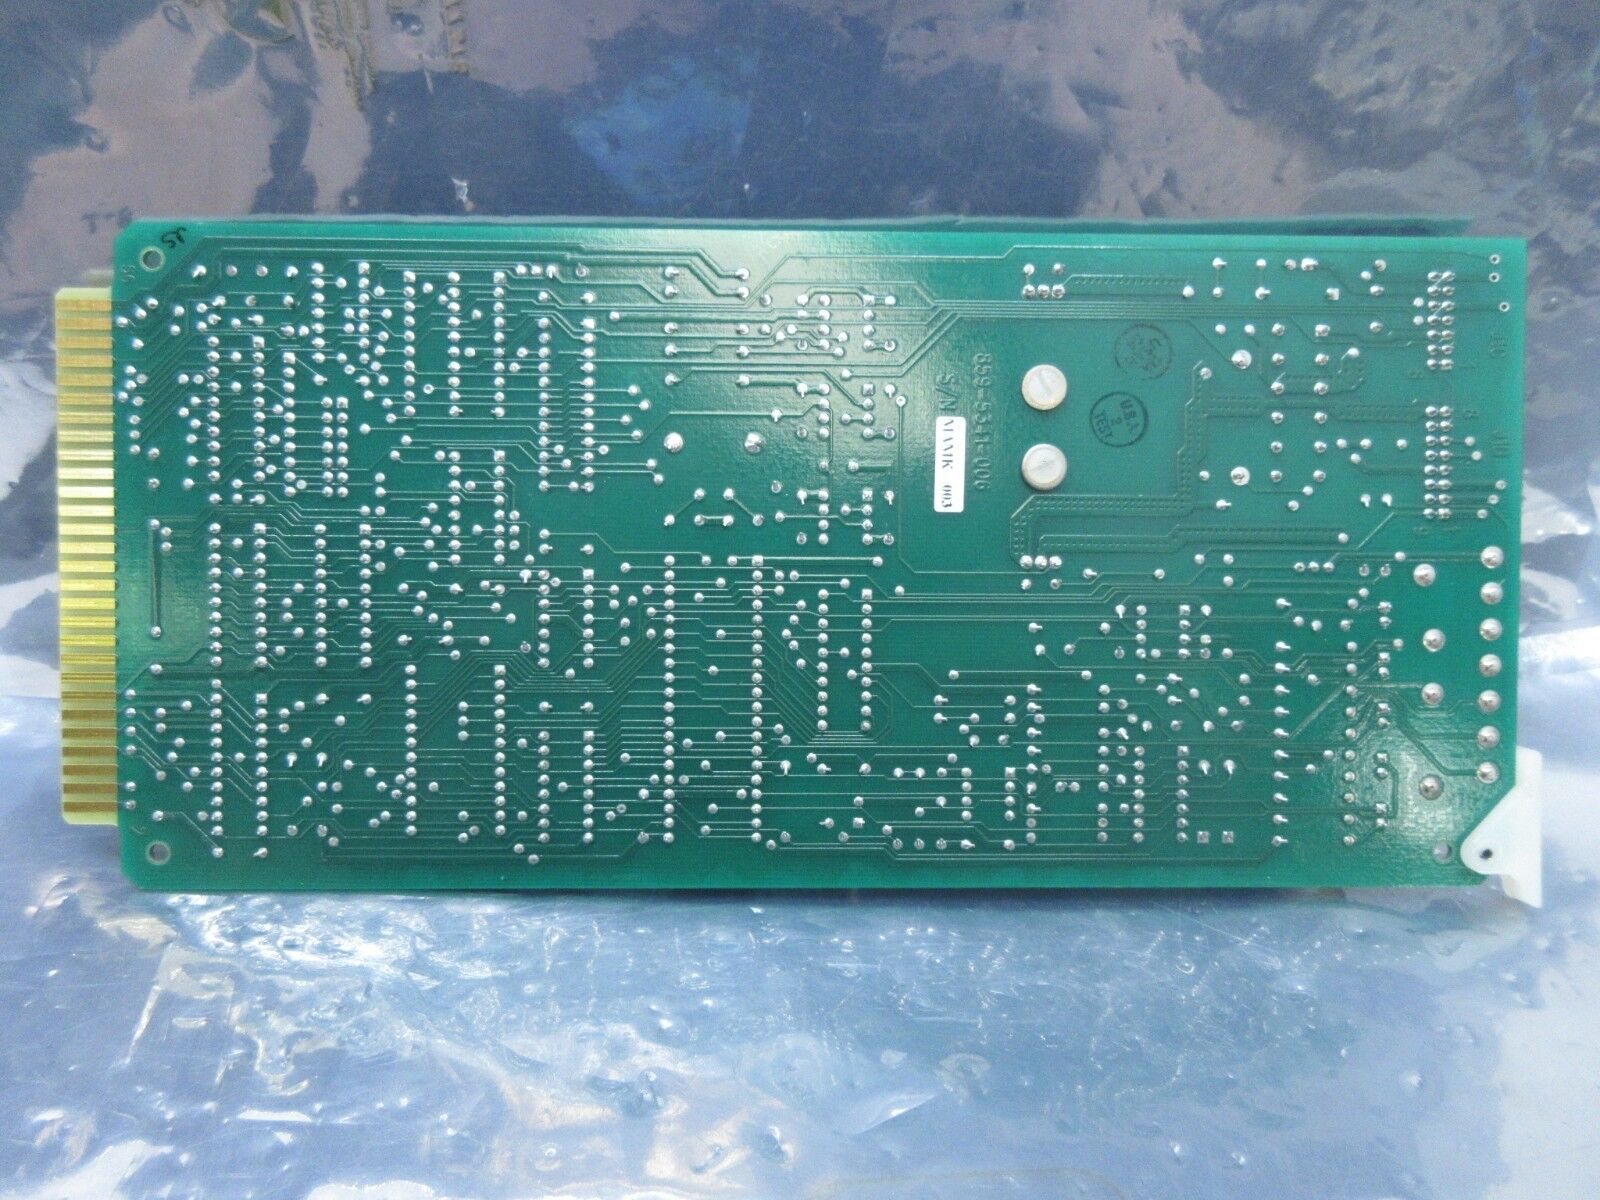 SVG Silicon Valley Group 859-0866-004 Processor PCB Card Rev. C ASML 90S Used